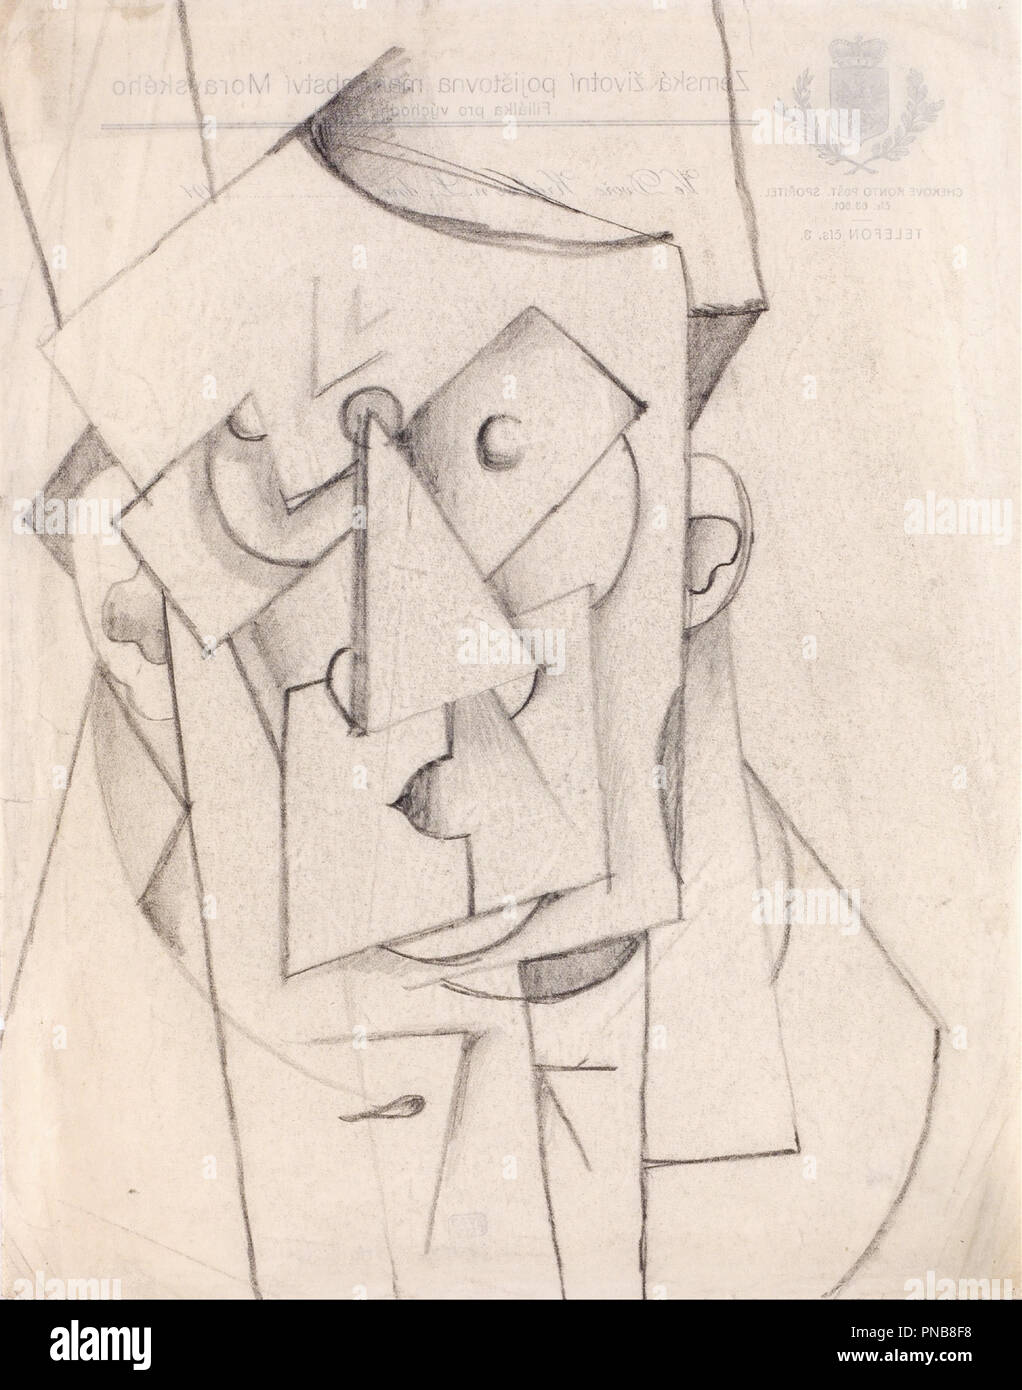 Cubist Composition - The Head. Date/Period: 1912 - 1913. Drawing. Height: 283 mm (11.14 in); Width: 226 mm (8.89 in). Author: OTTO GUTFREUND. Stock Photo